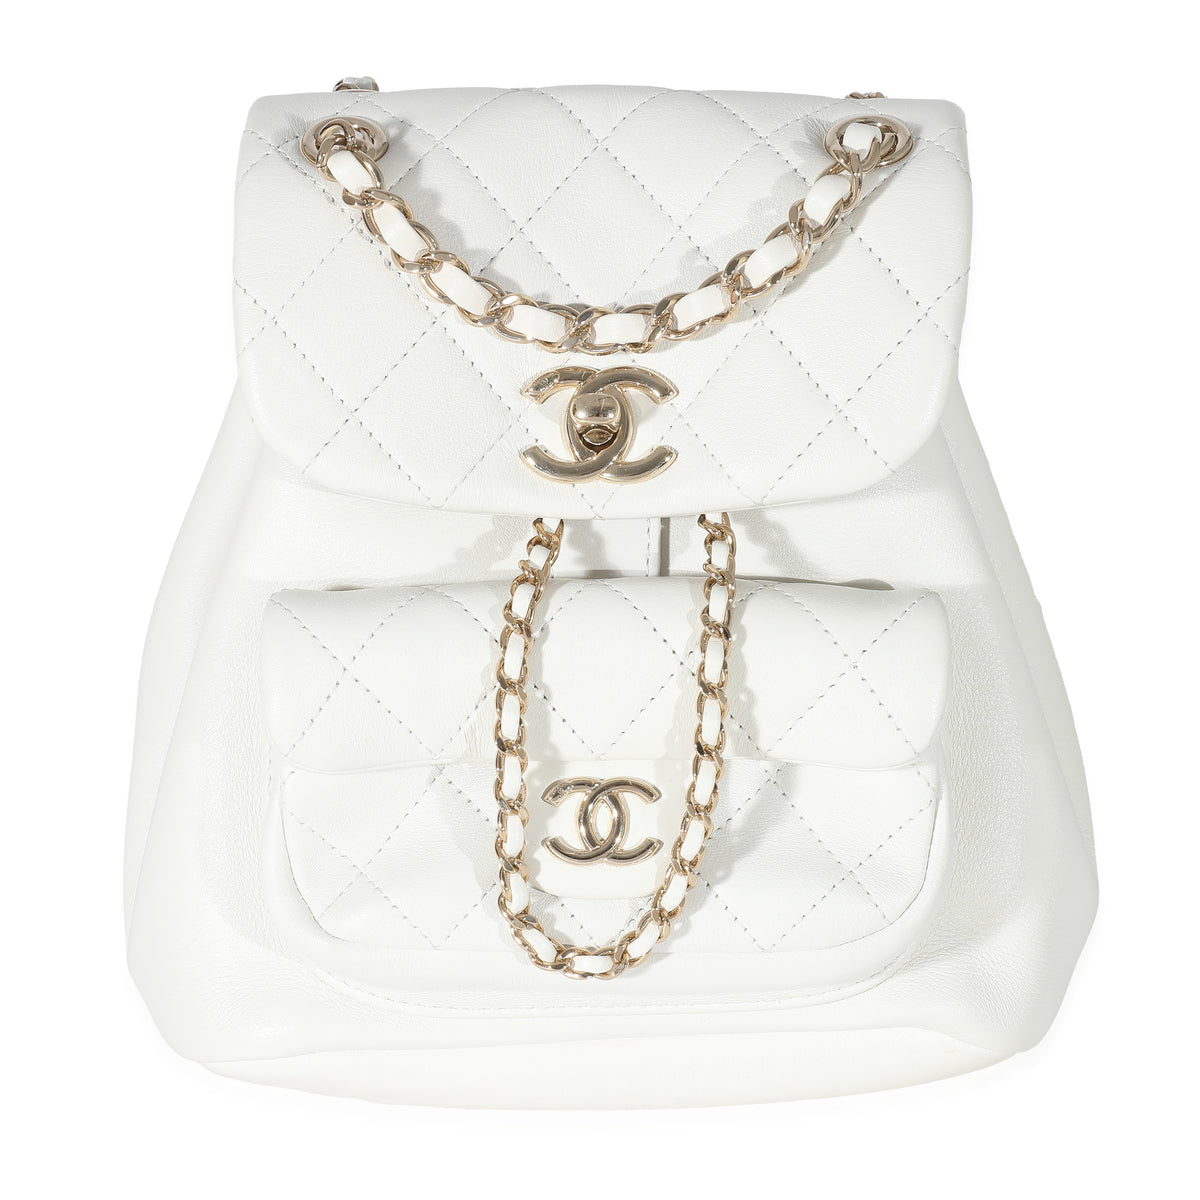 Chanel White Shiny Aged Quilted Lambskin Small Duma Drawstring